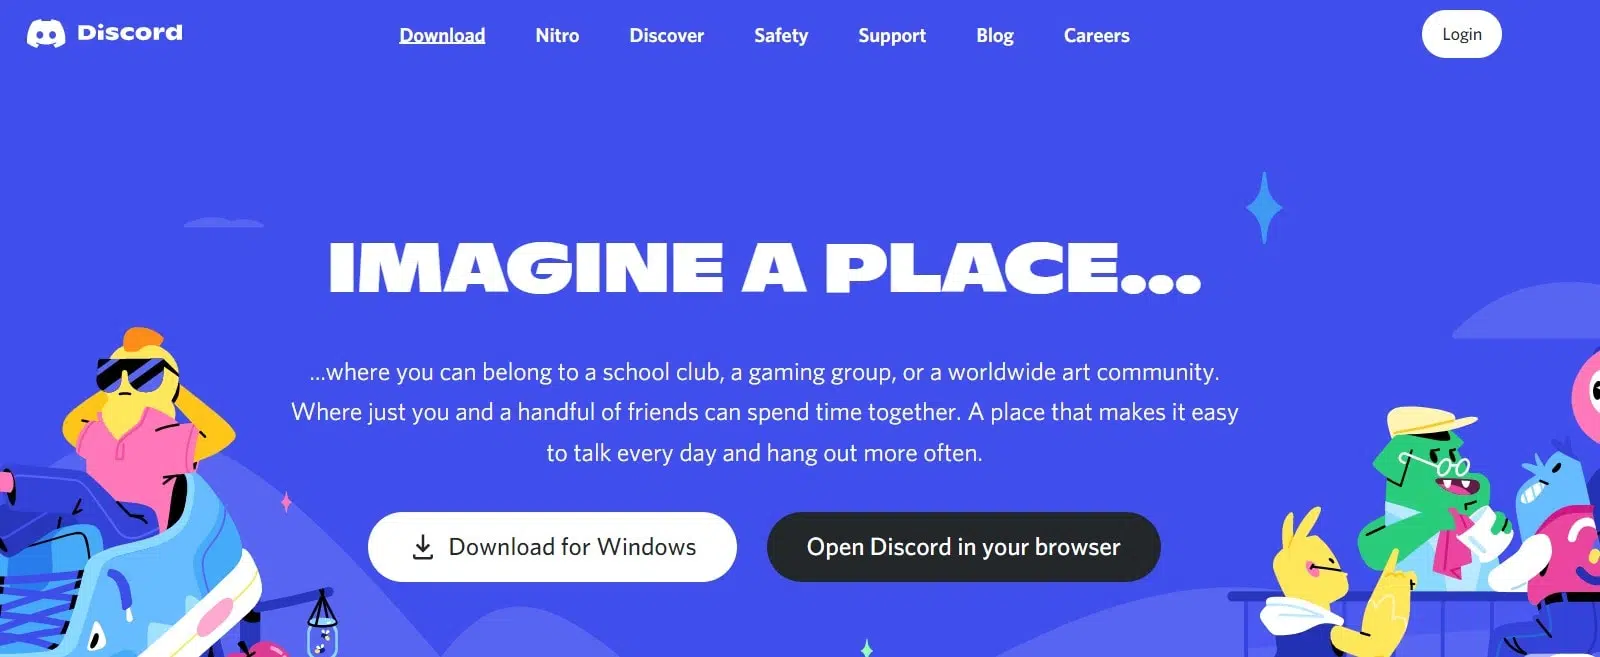 A Guide To Adding A Discord Banner To Your Profile